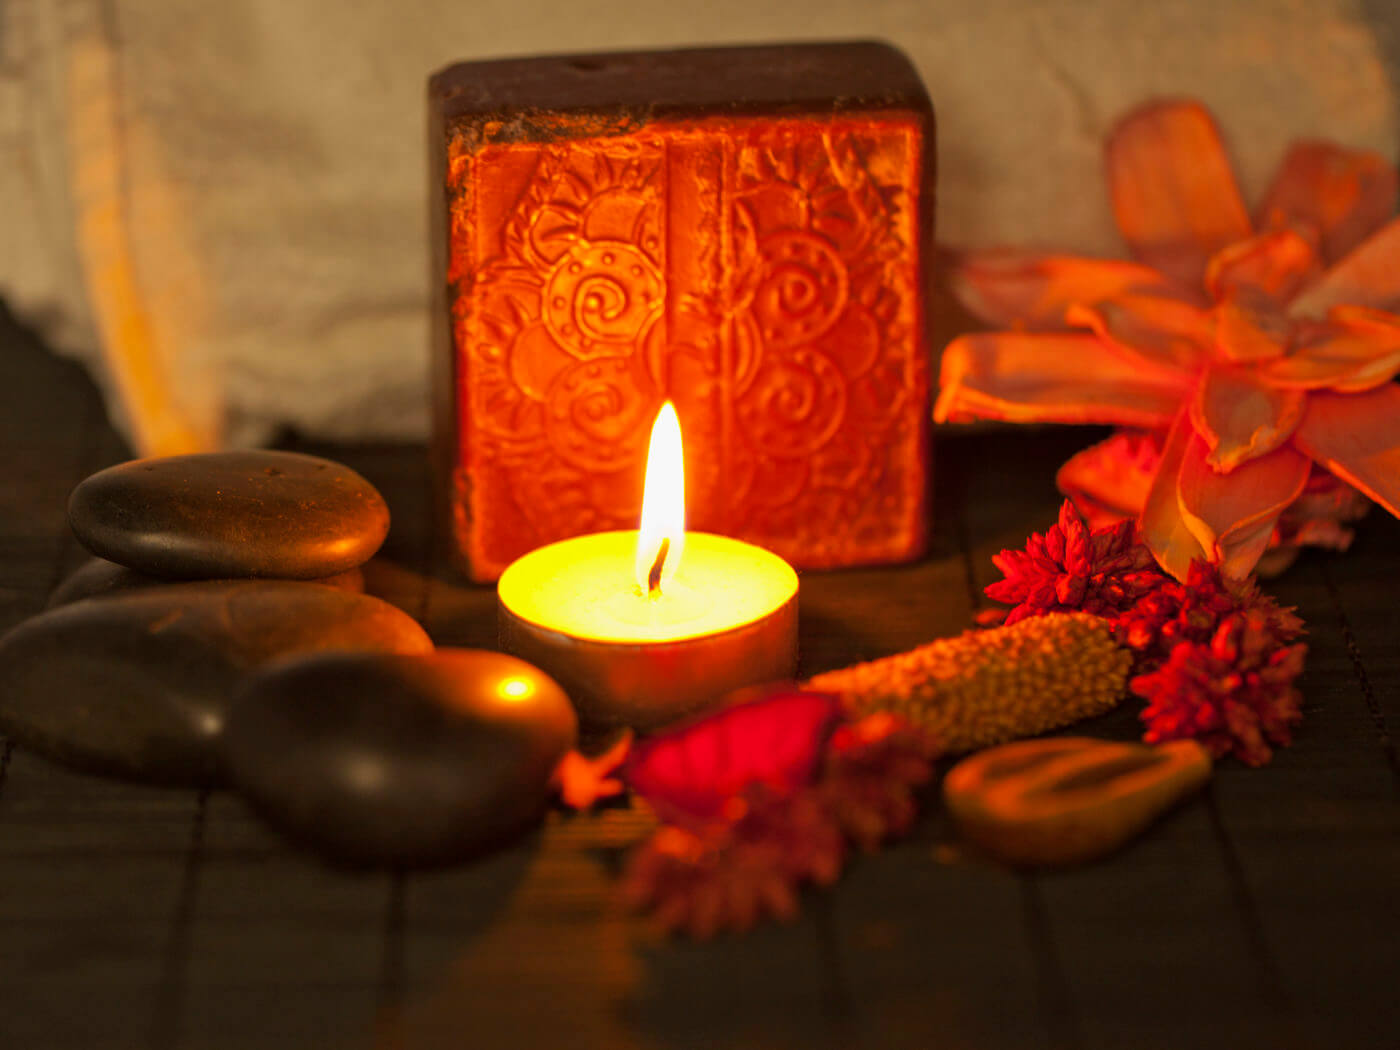 Brown soap, candle, stones and towel over wooden background